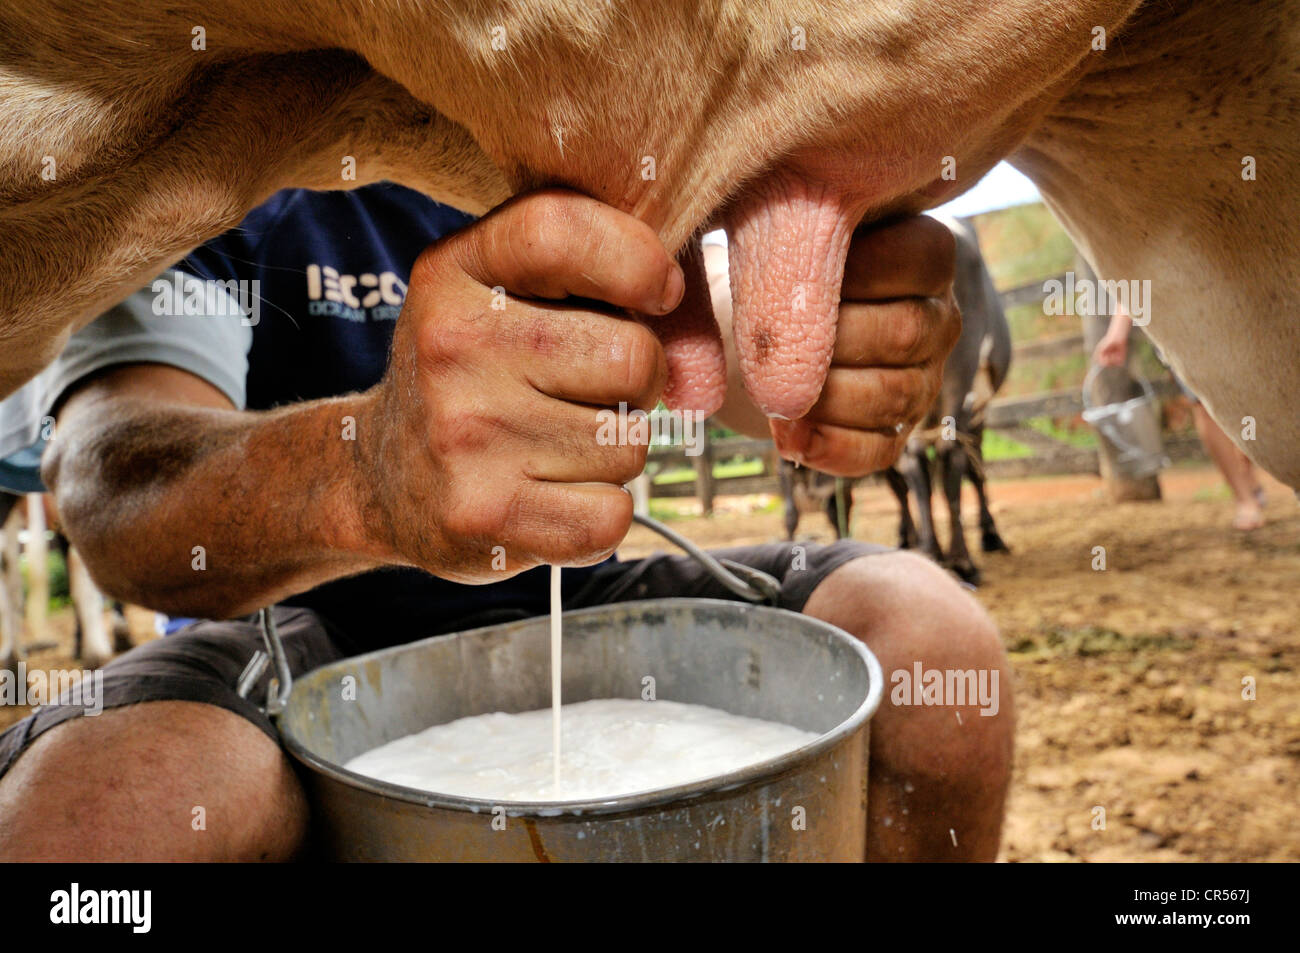 man-milking-a-cow-by-hand-settlement-of-the-movimento-dos-trabalhadores-CR567J.jpg